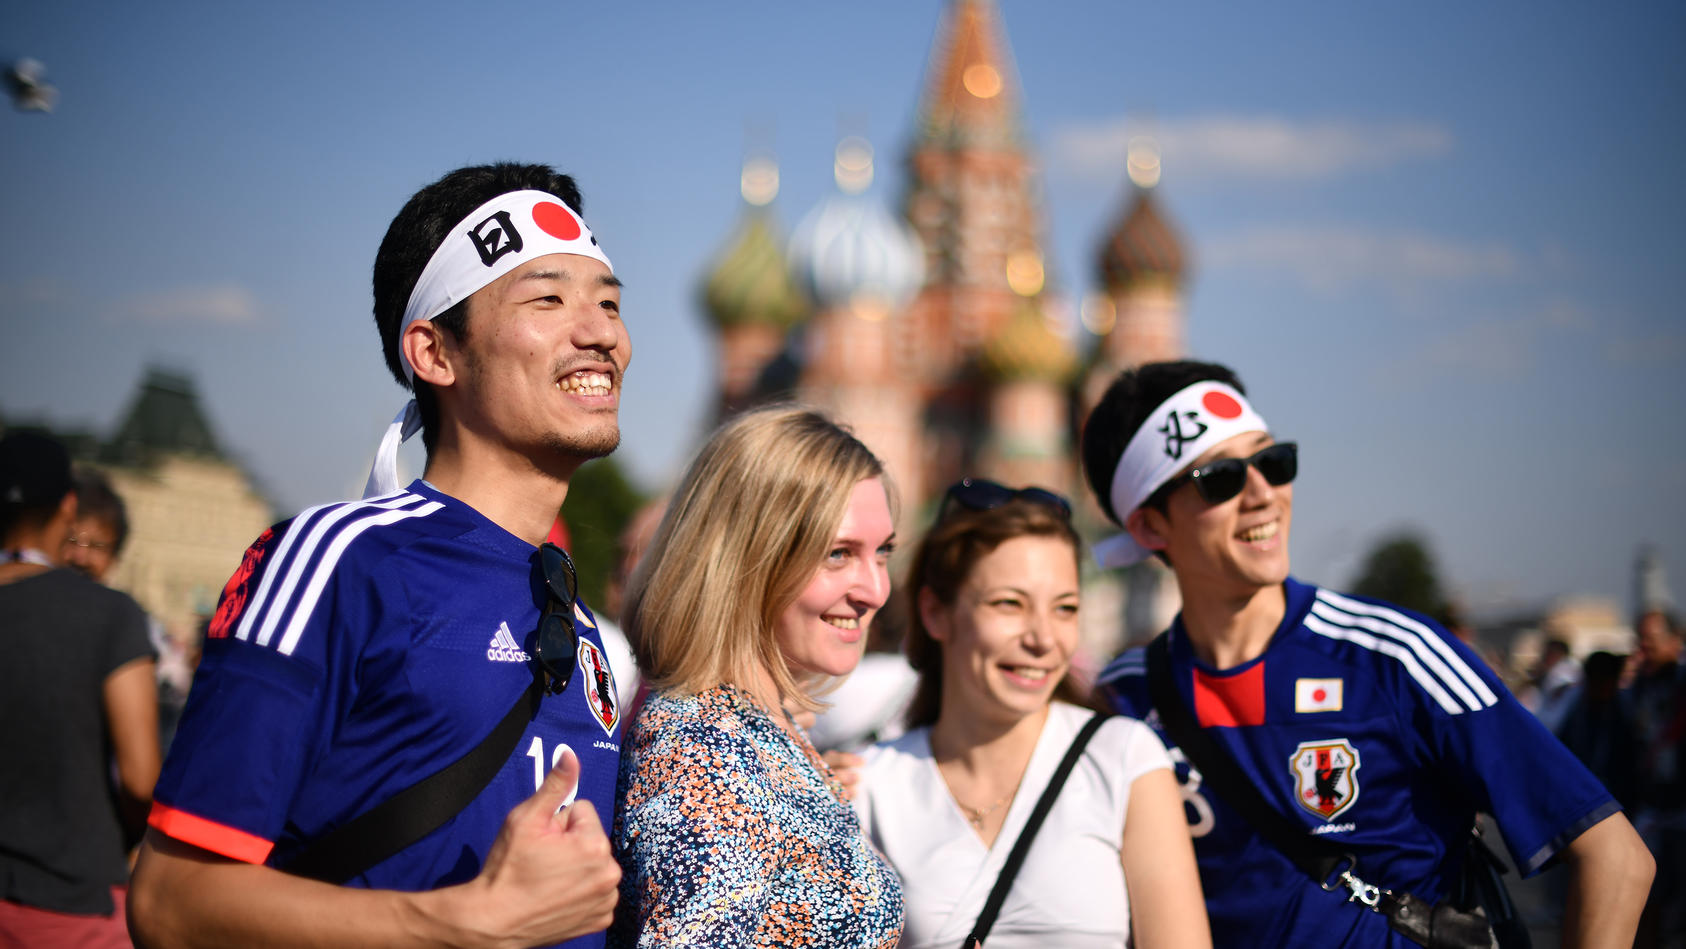 MOSCOW, RUSSIA - JUNE 18: Fans of Japan pose with russian women at Moscow Red Square on June 18, 2018 in Moscow, Russia. (Photo by Hector Vivas/Getty Images )